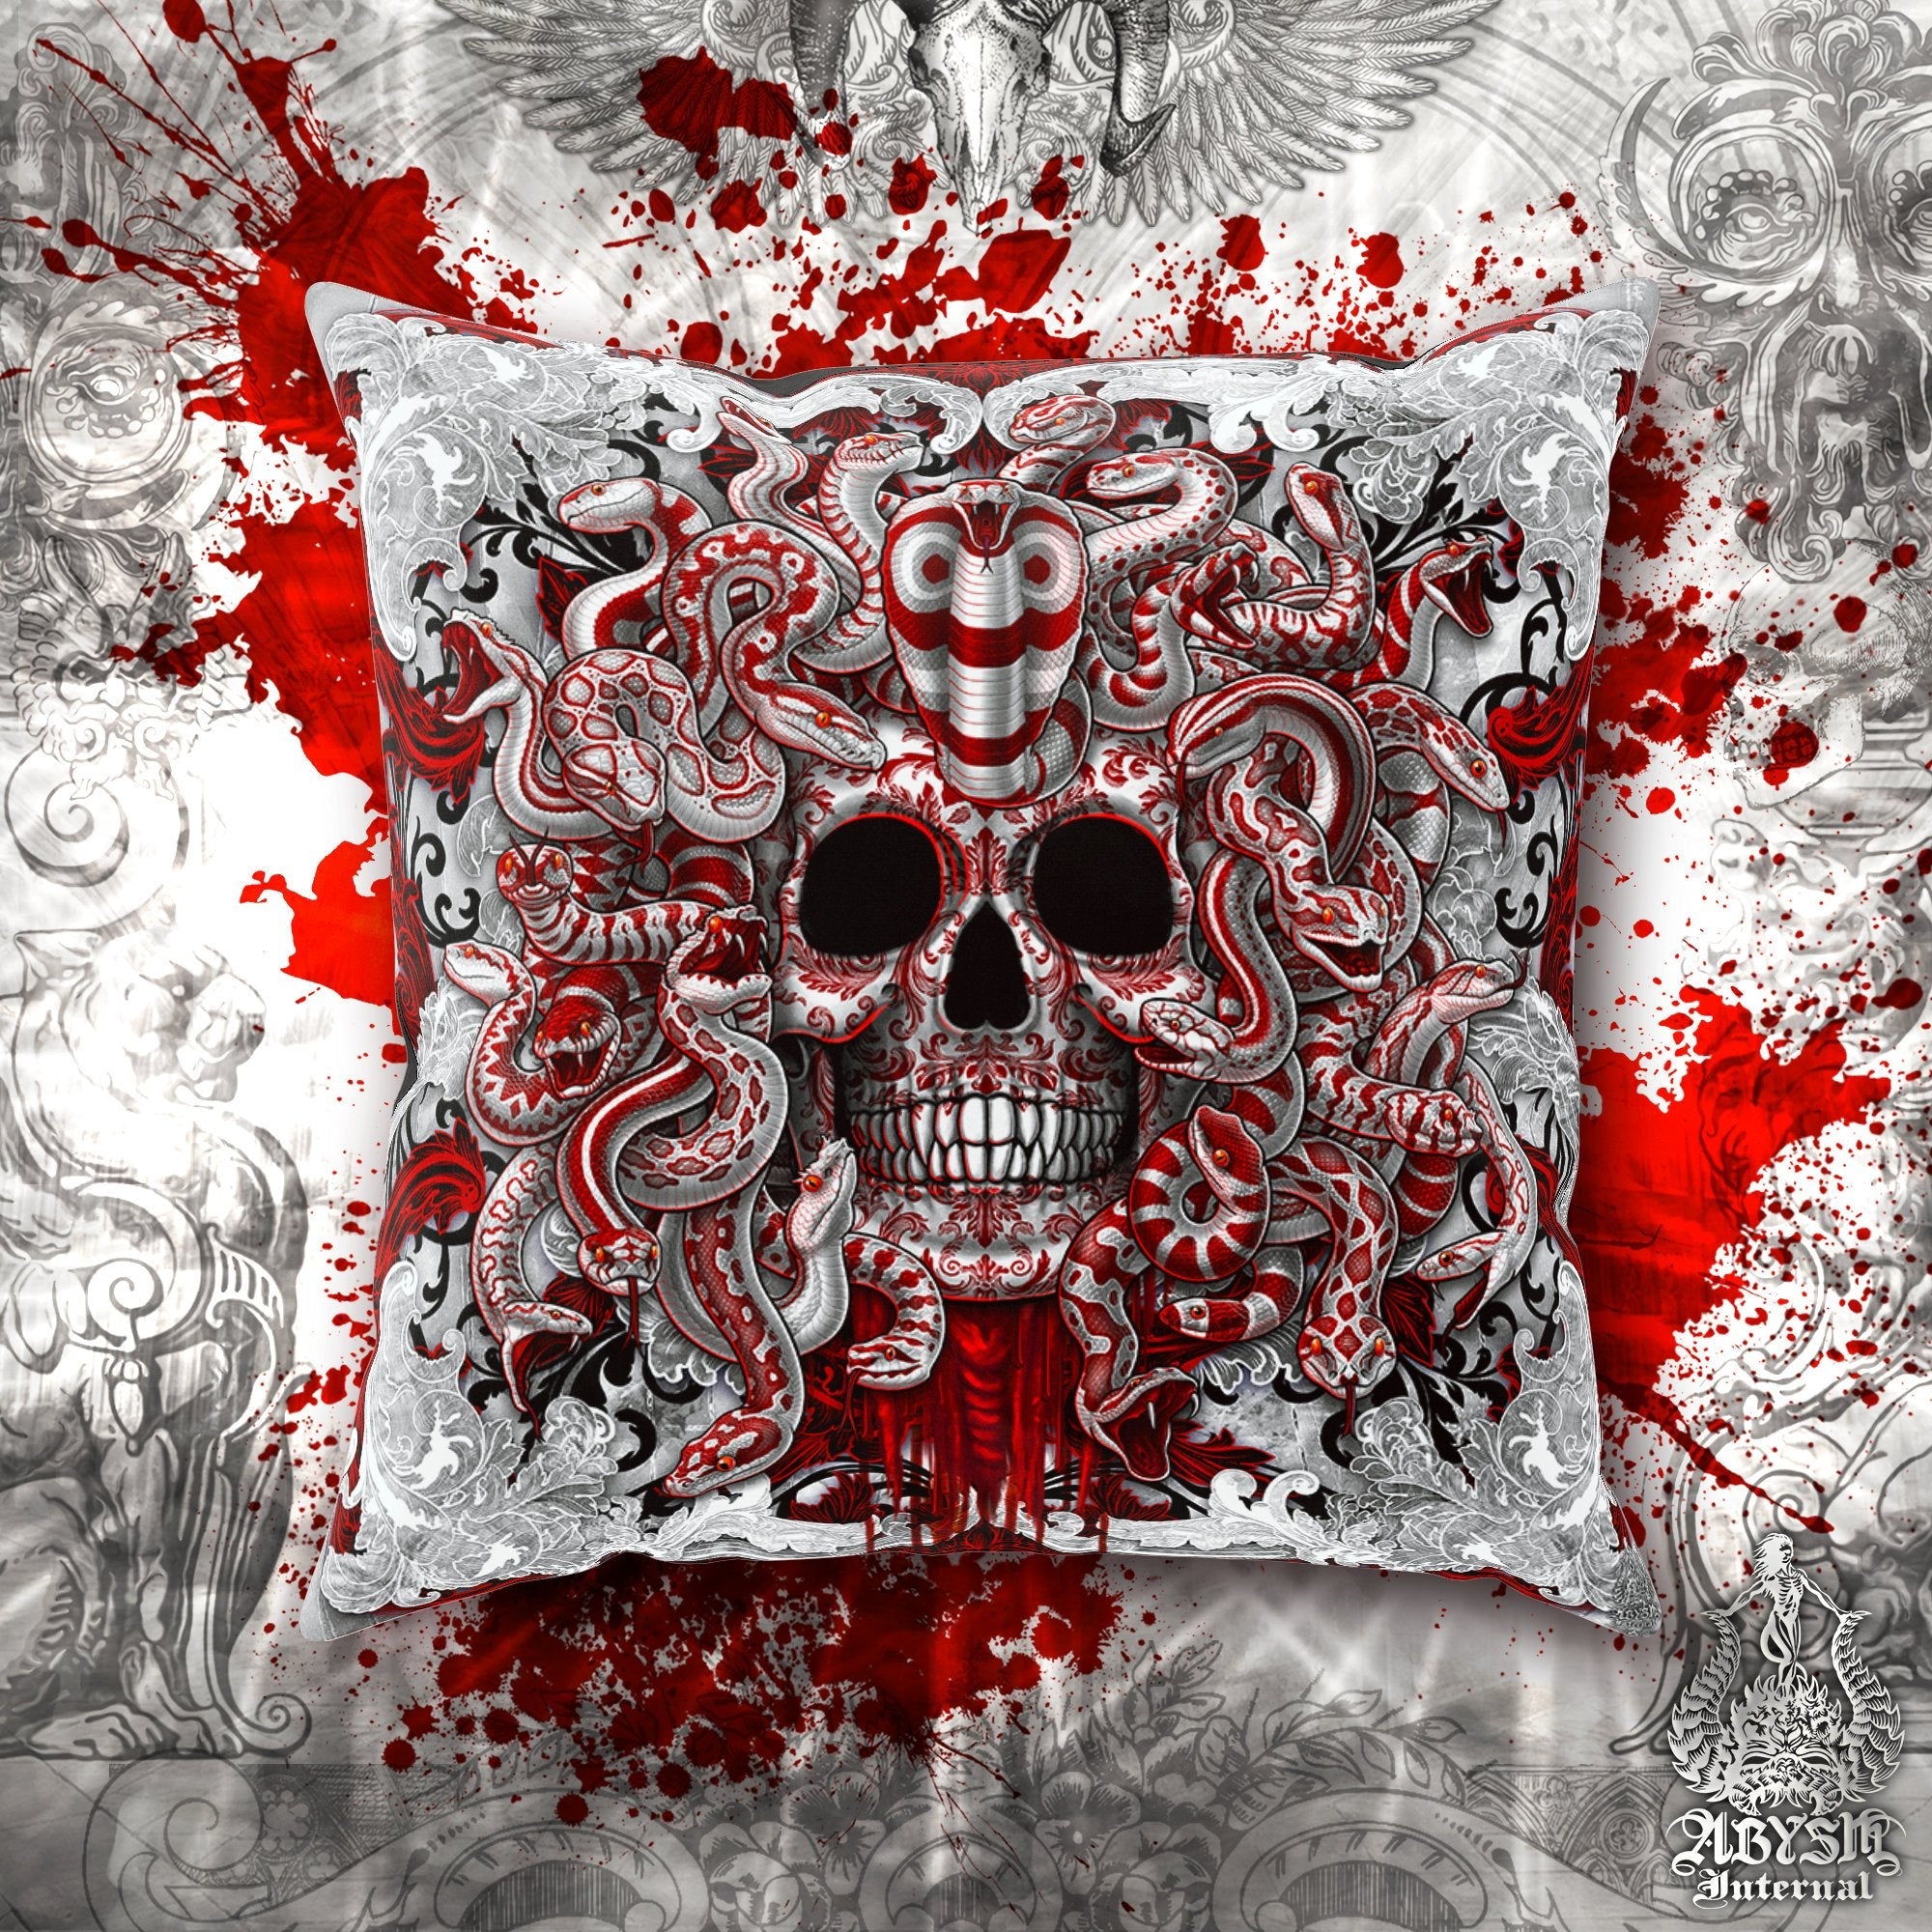 Skull Throw Pillow, Decorative Accent Cushion, White Goth Room Decor, Horror and Gothic Art, Alternative Home - Bloody White Medusa Snakes - Abysm Internal